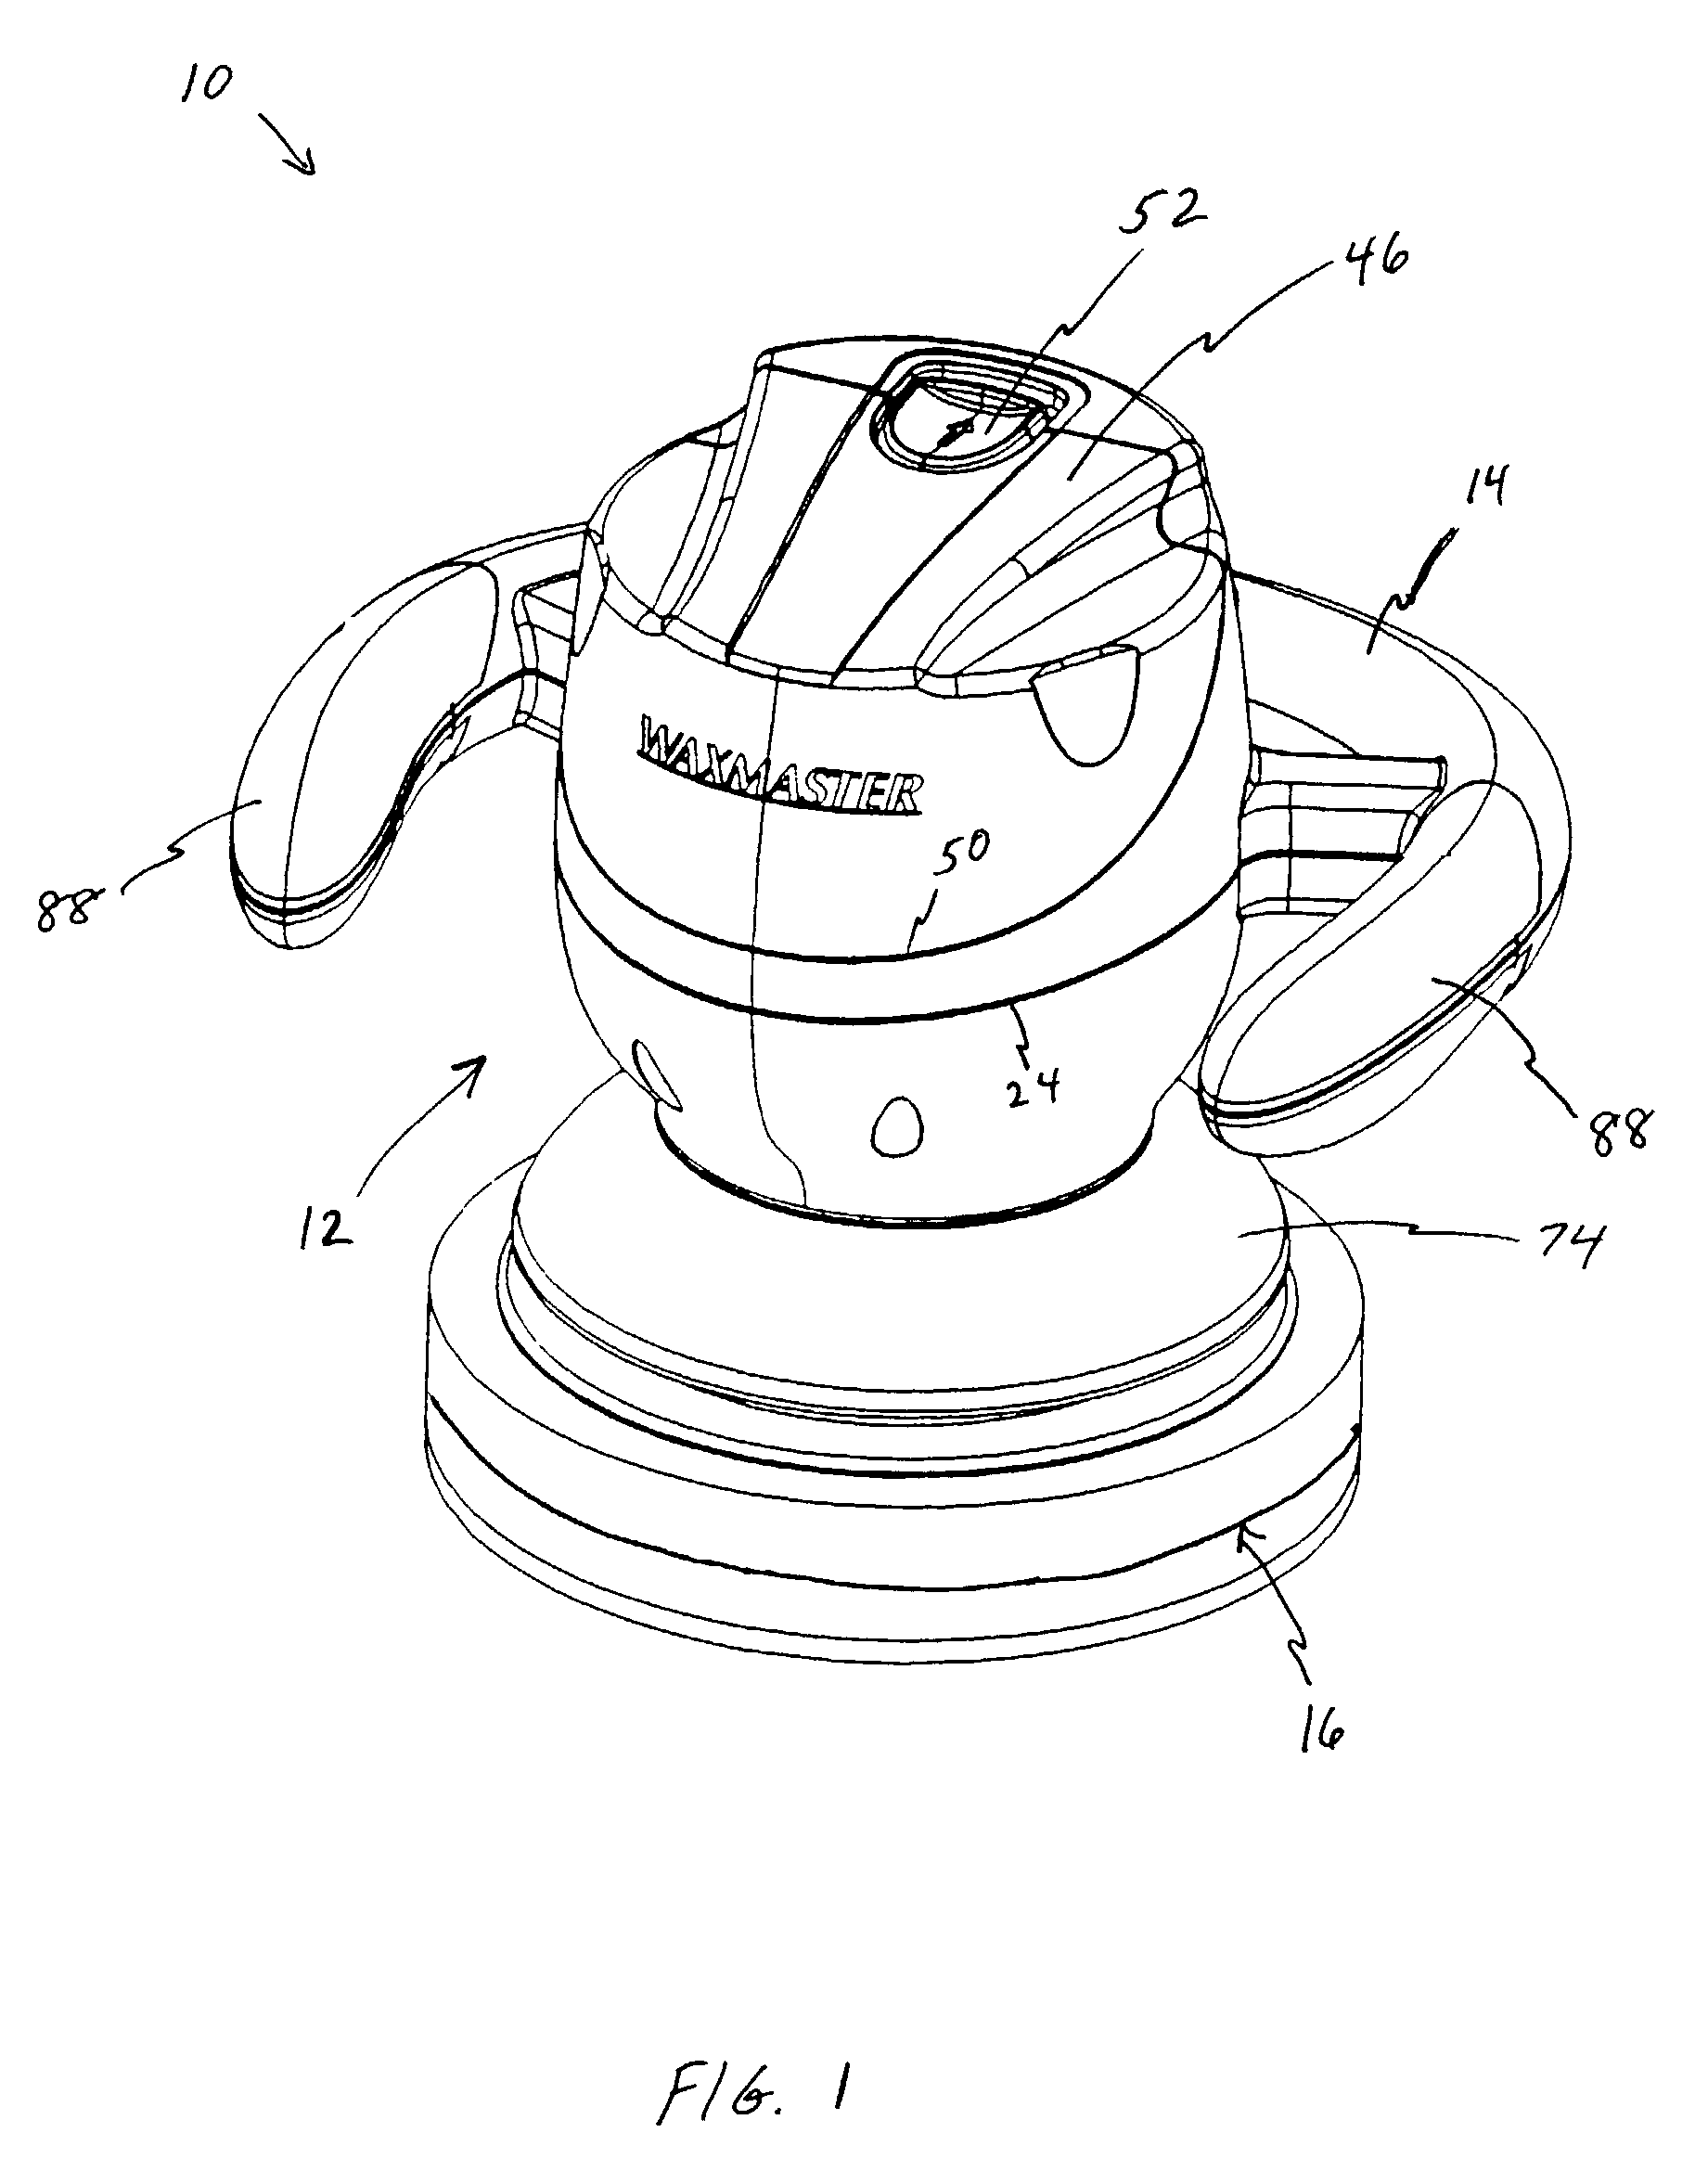 Power tool with portable power source